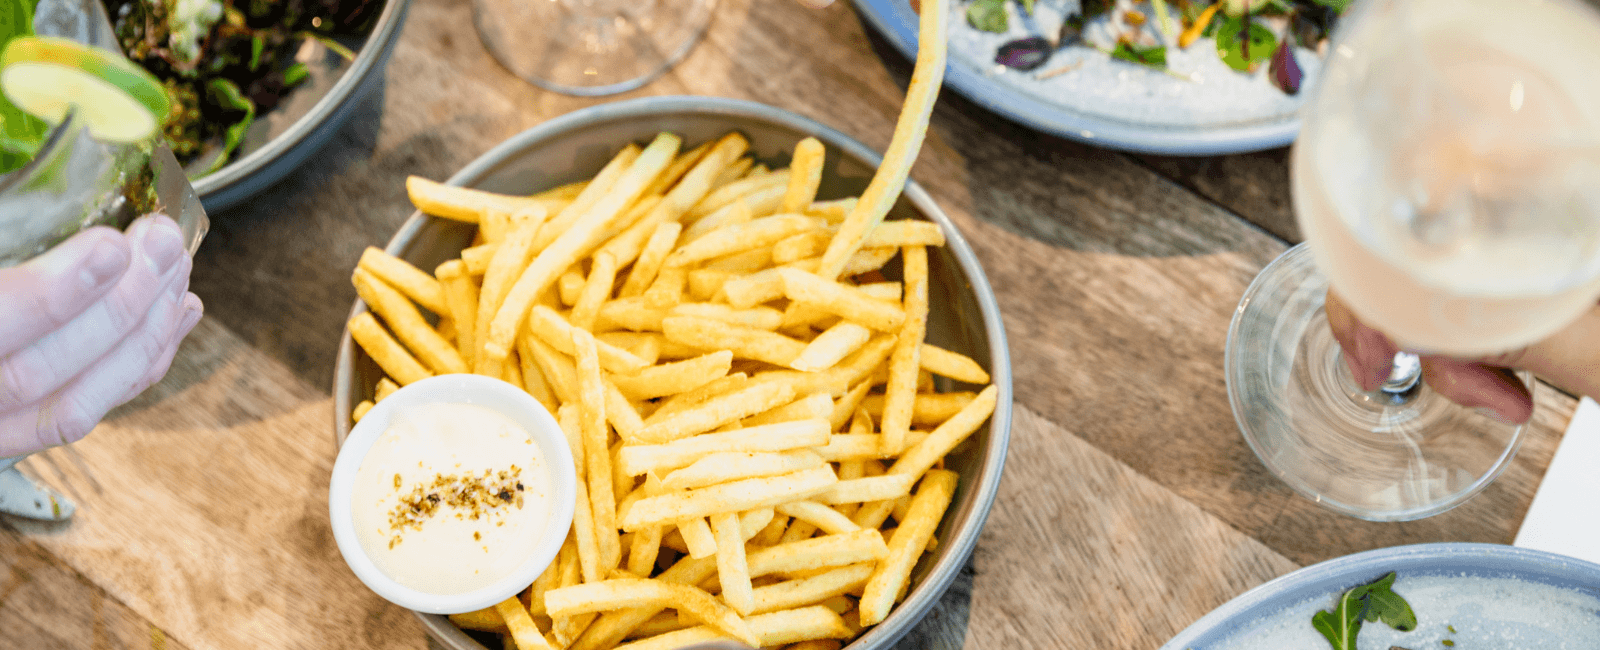 French fries from Windmill & Co